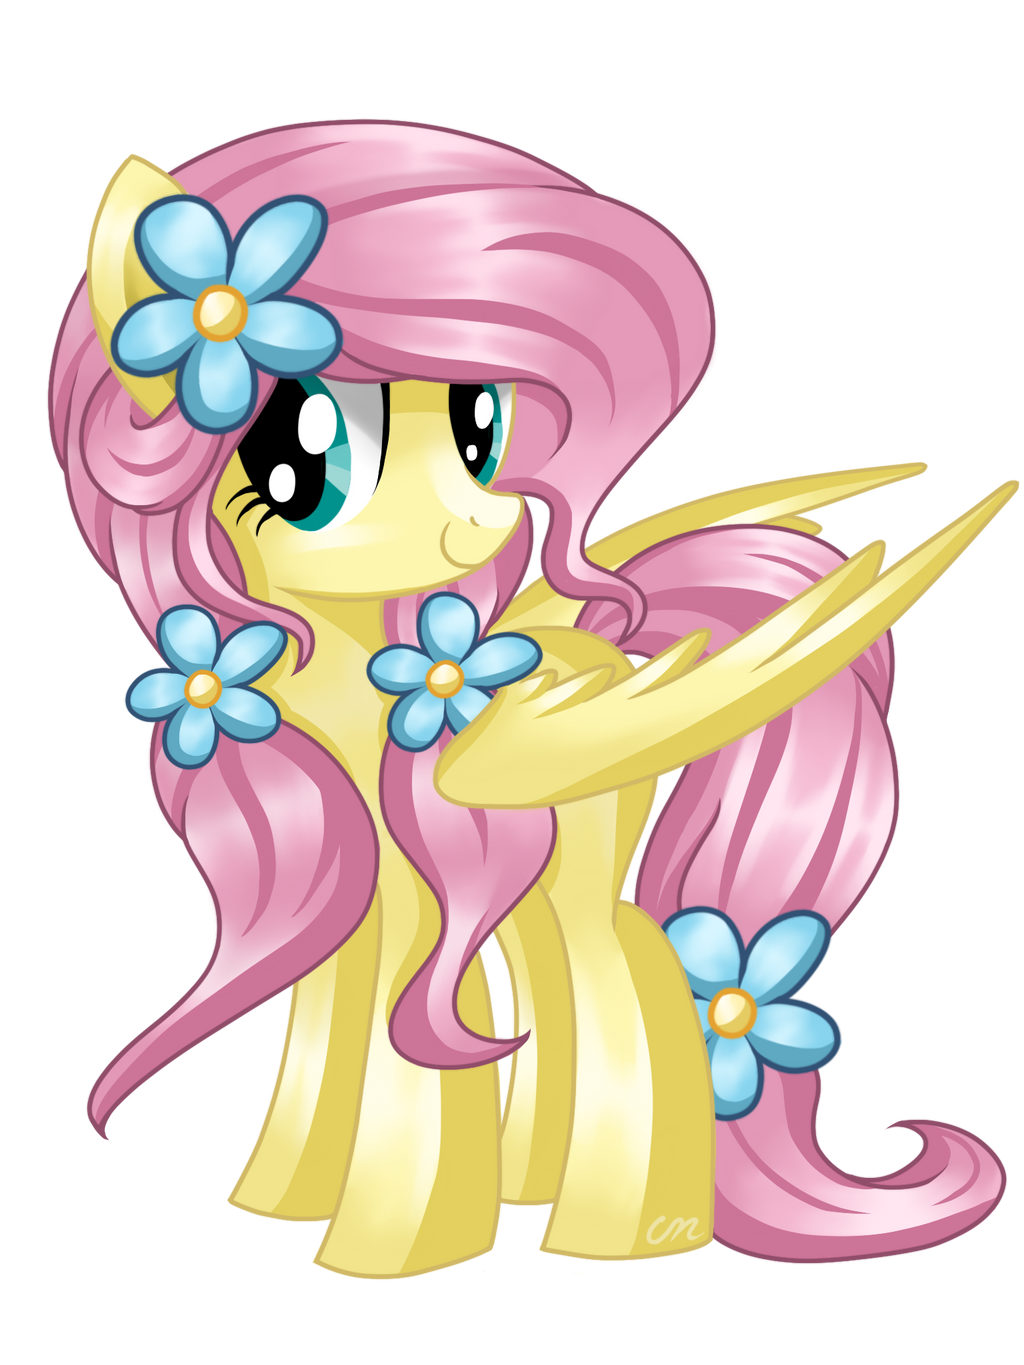 fluttershy__different_mane__by_sunshineshiny-d9qn8z6.png